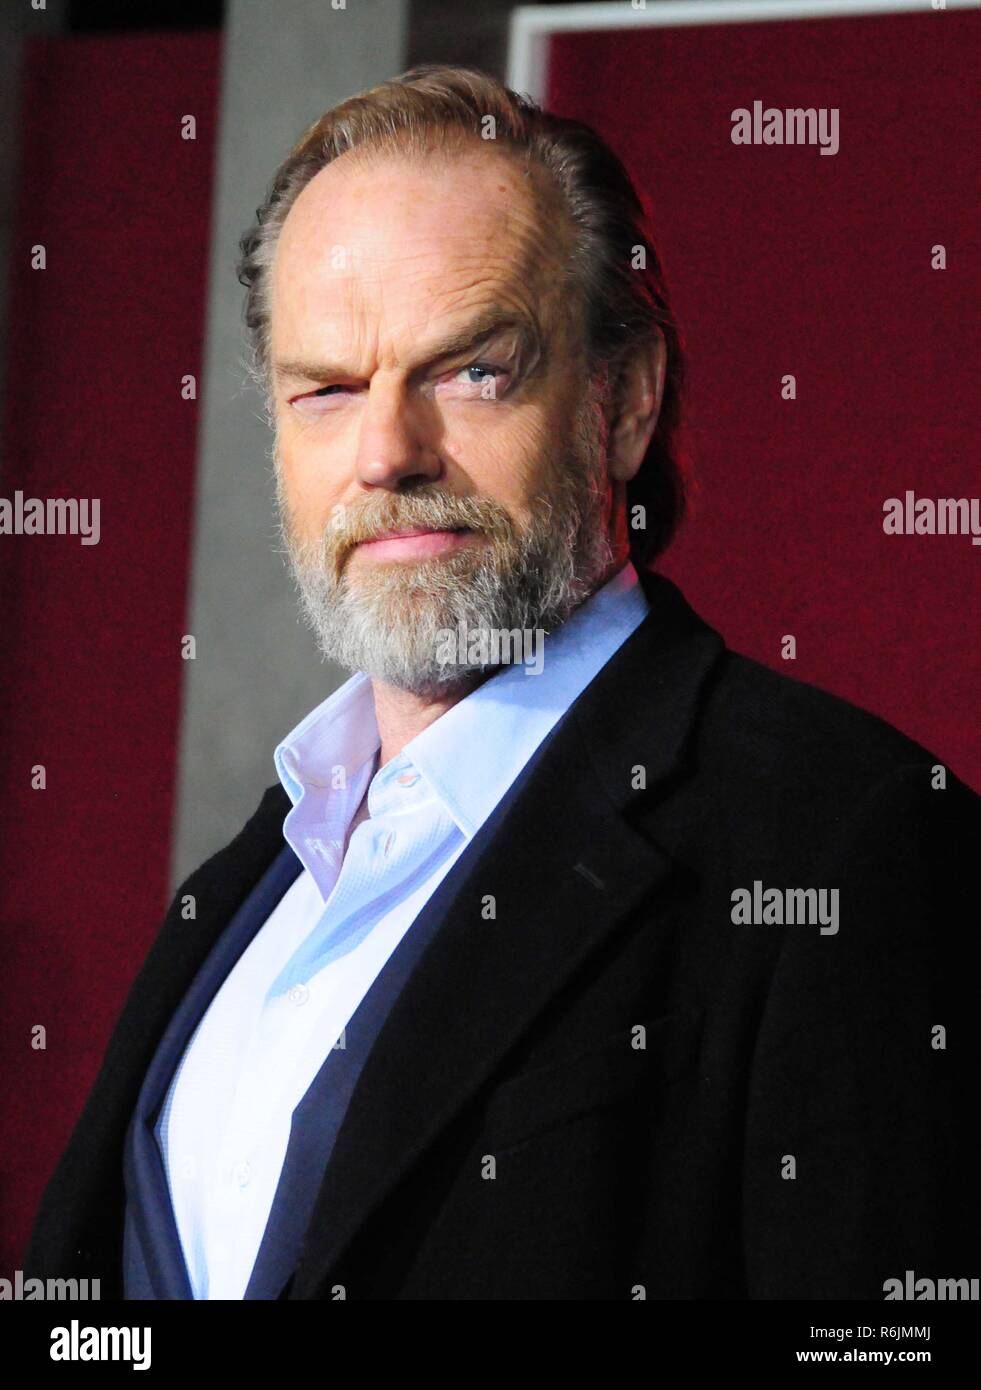 British actor Hugo Weaving announces appearance at WA's South West  CinefestOZ ahead of new film The Rooster